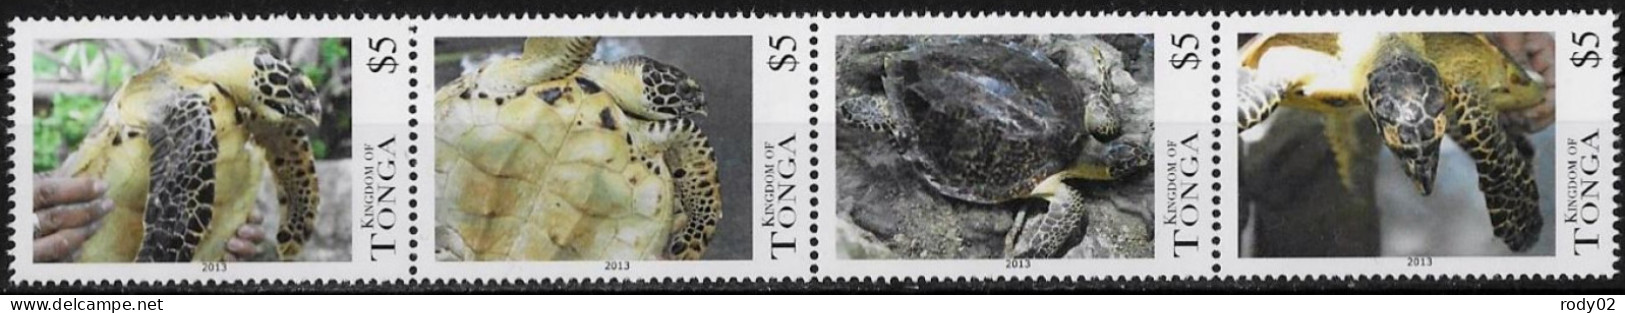 TONGA - TORTUES - N° 1341 A 1344 ET 1345 A 1348 - NEUF** MNH - Turtles